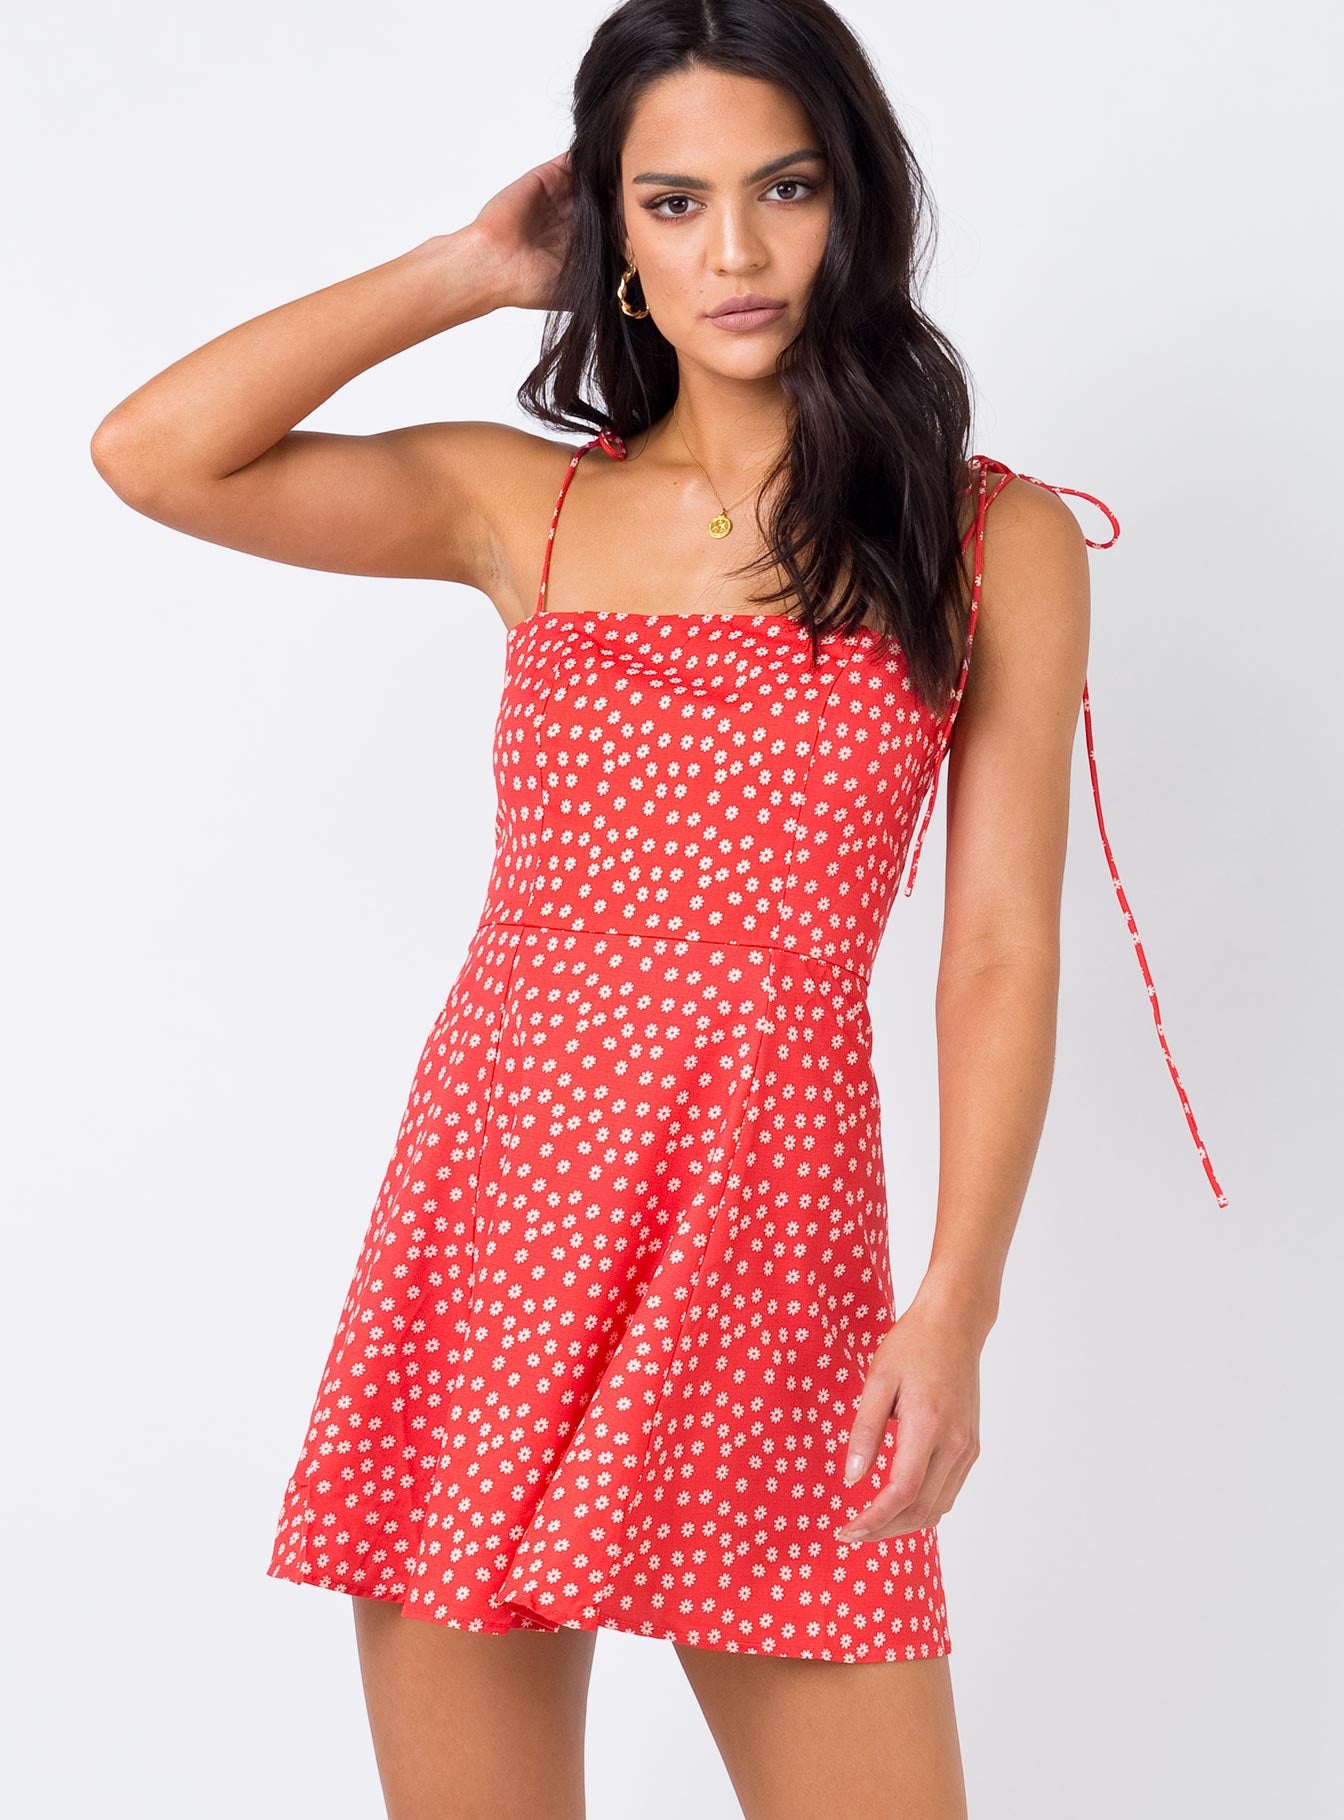 Princess Polly Red Floral Dress on Sale ...